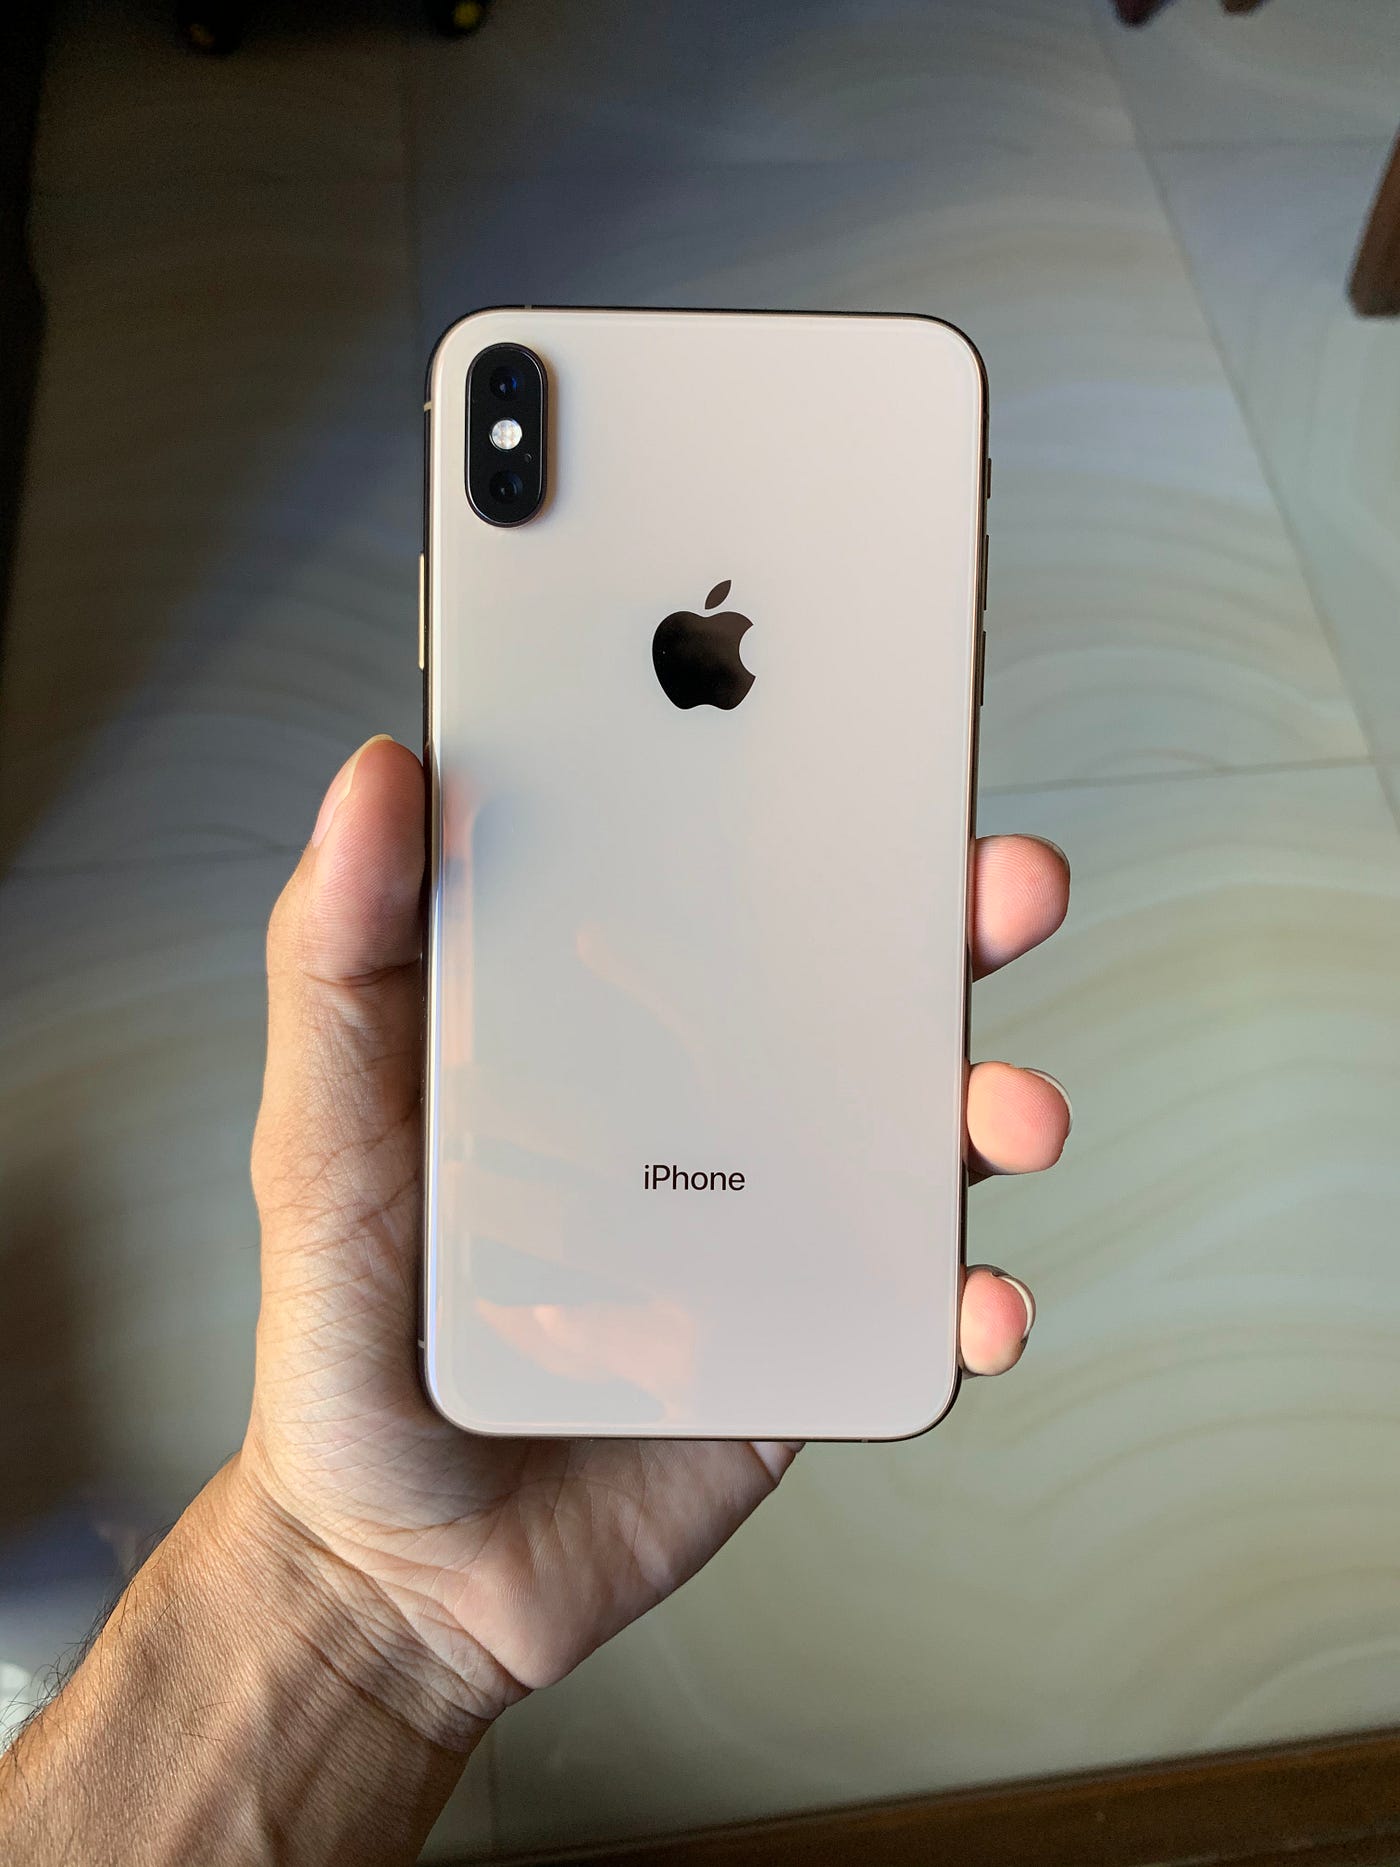 Using the iPhone X in 2024 - worth it? 